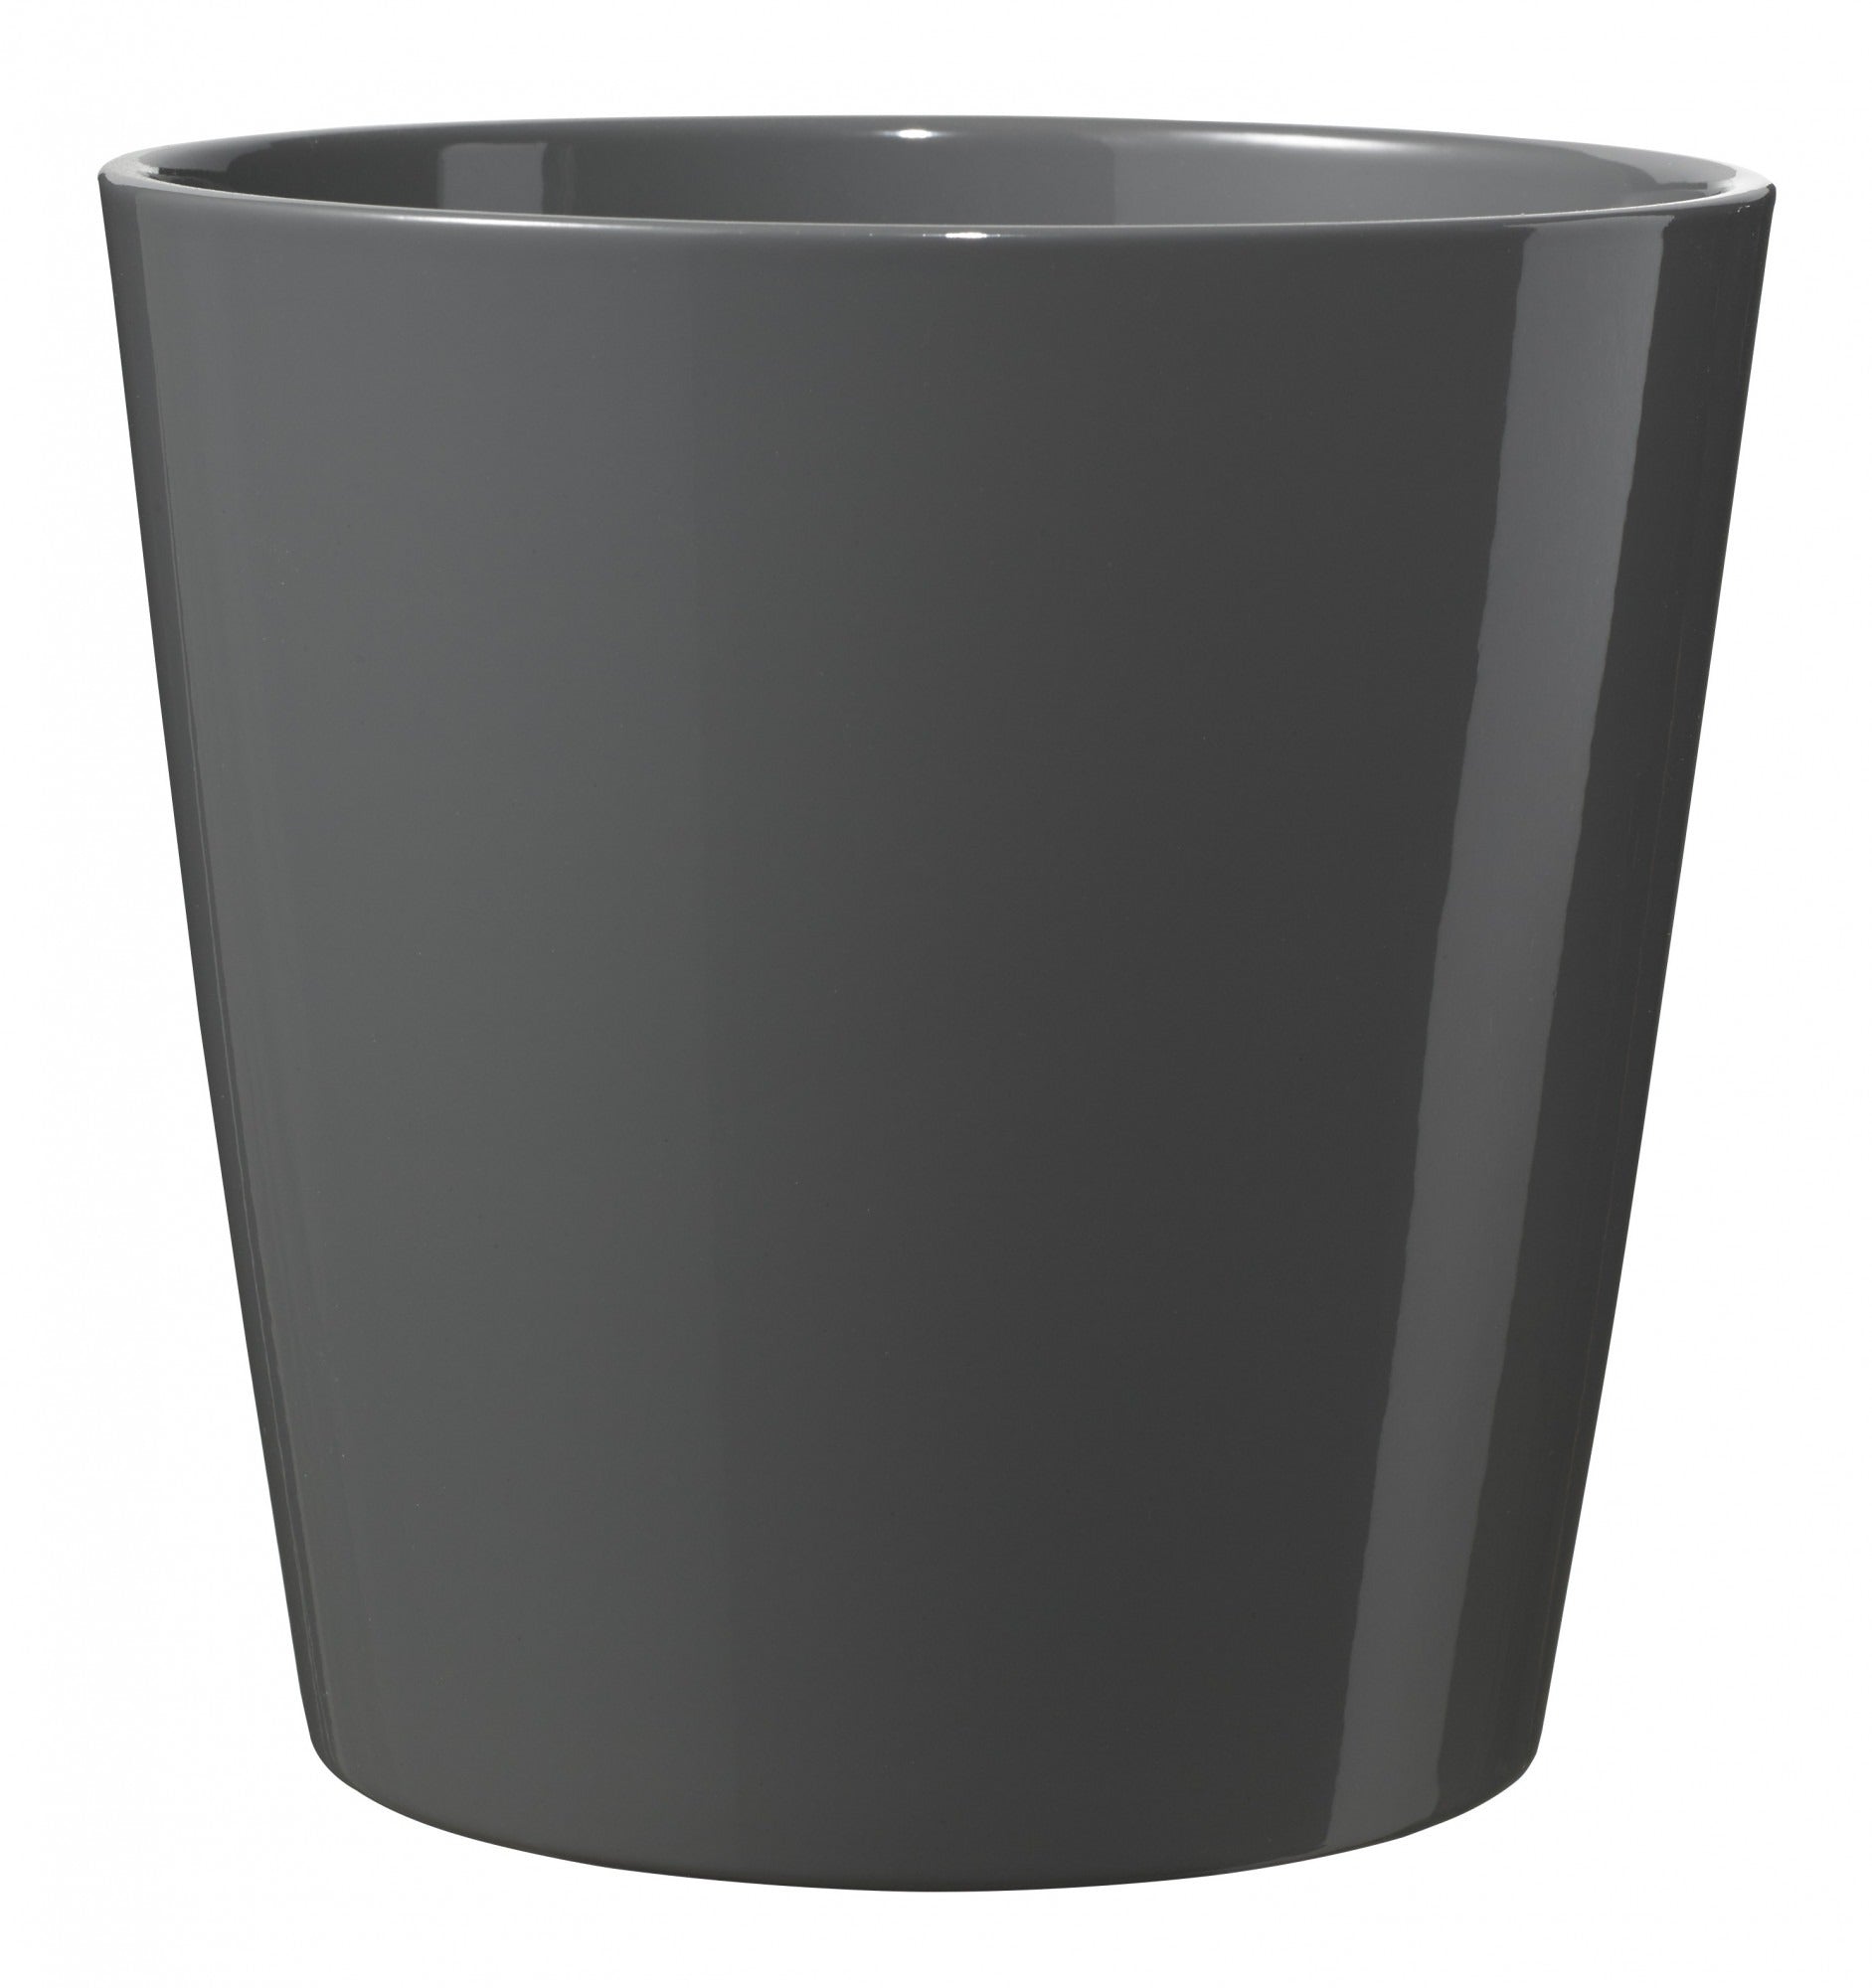 View 24cm Shiny Anthracite Dallas Style Pot information